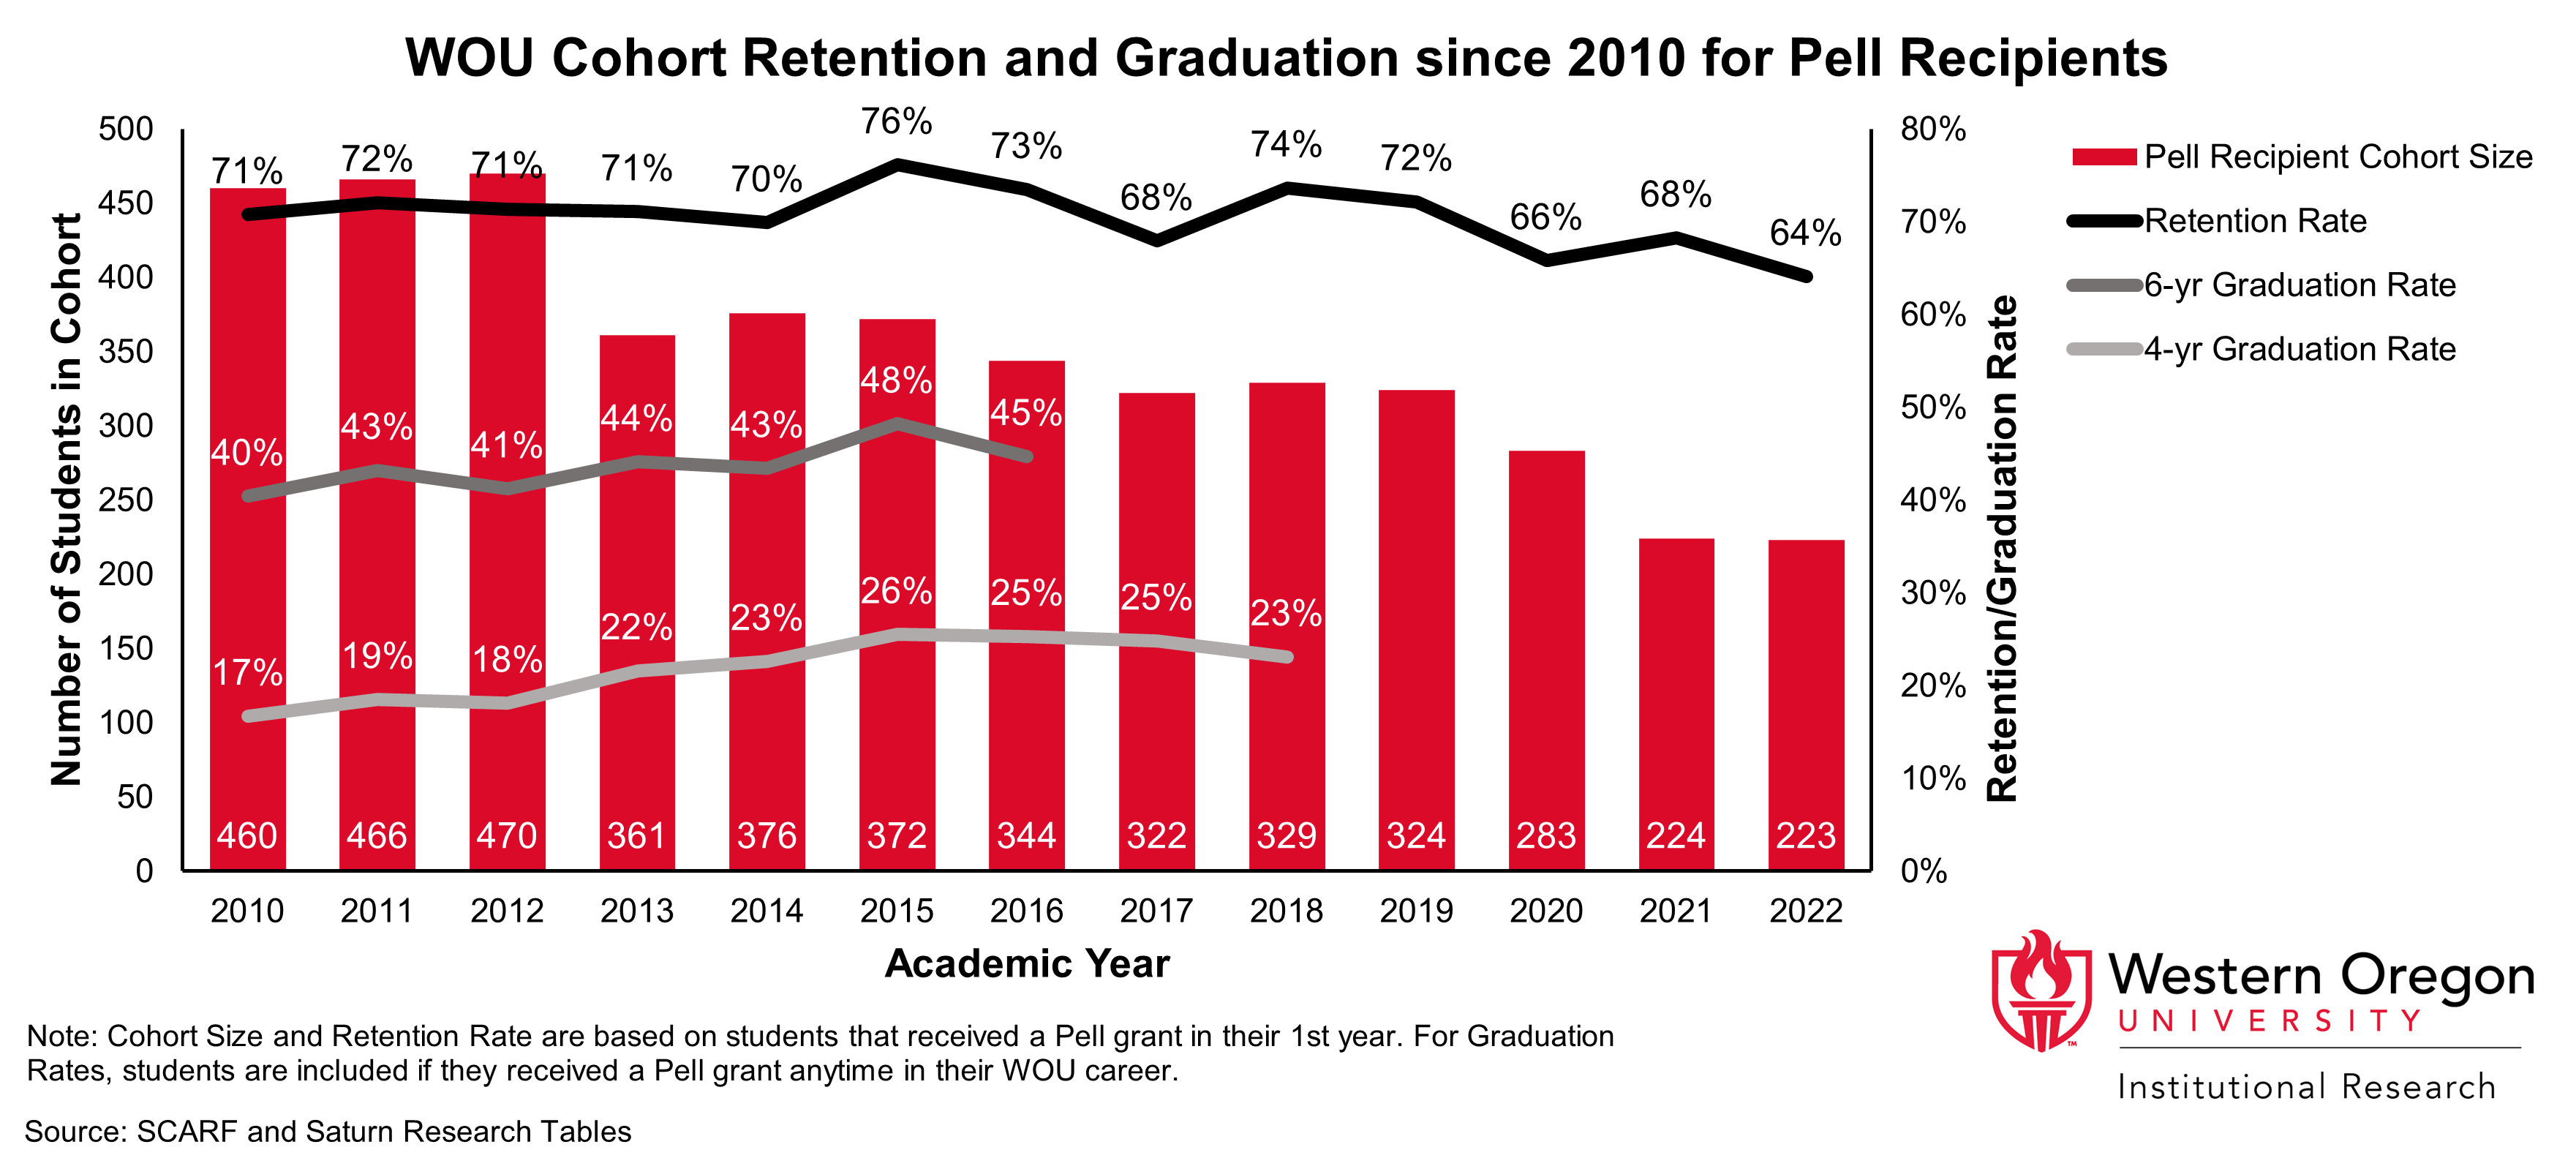 Bar and line graph of retention and 4- and 6-year graduation rates since 2010 for WOU students that are Pell recipients, showing that graduation rates have increased overall, but retention rates have not.